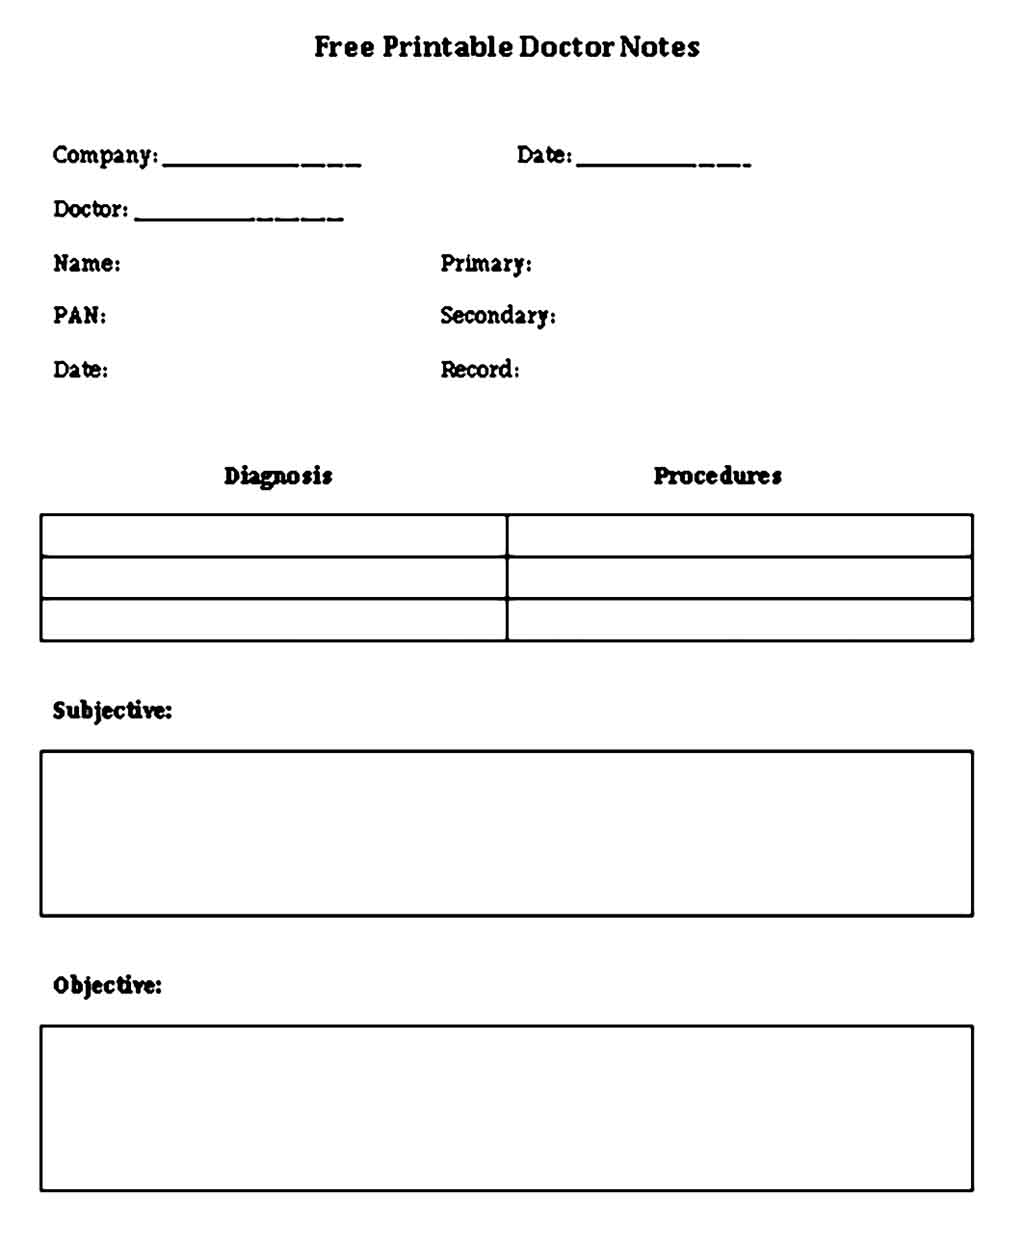 free printable doctor notes